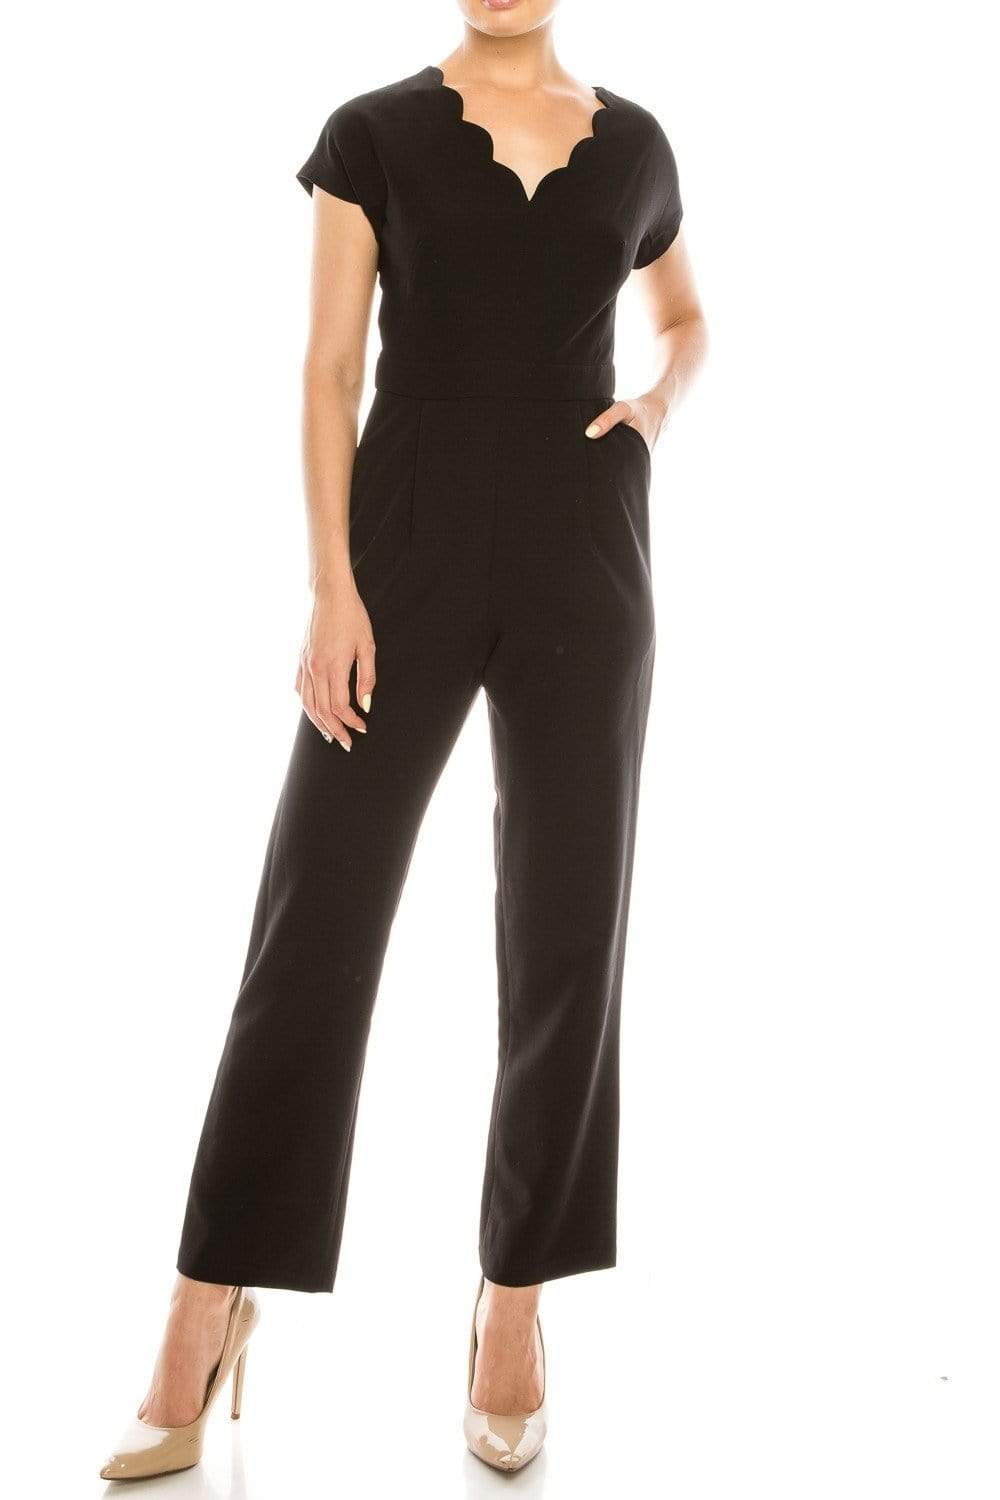 Image of Maggy London - G3823M Scalloped V-Neck Jumpsuit